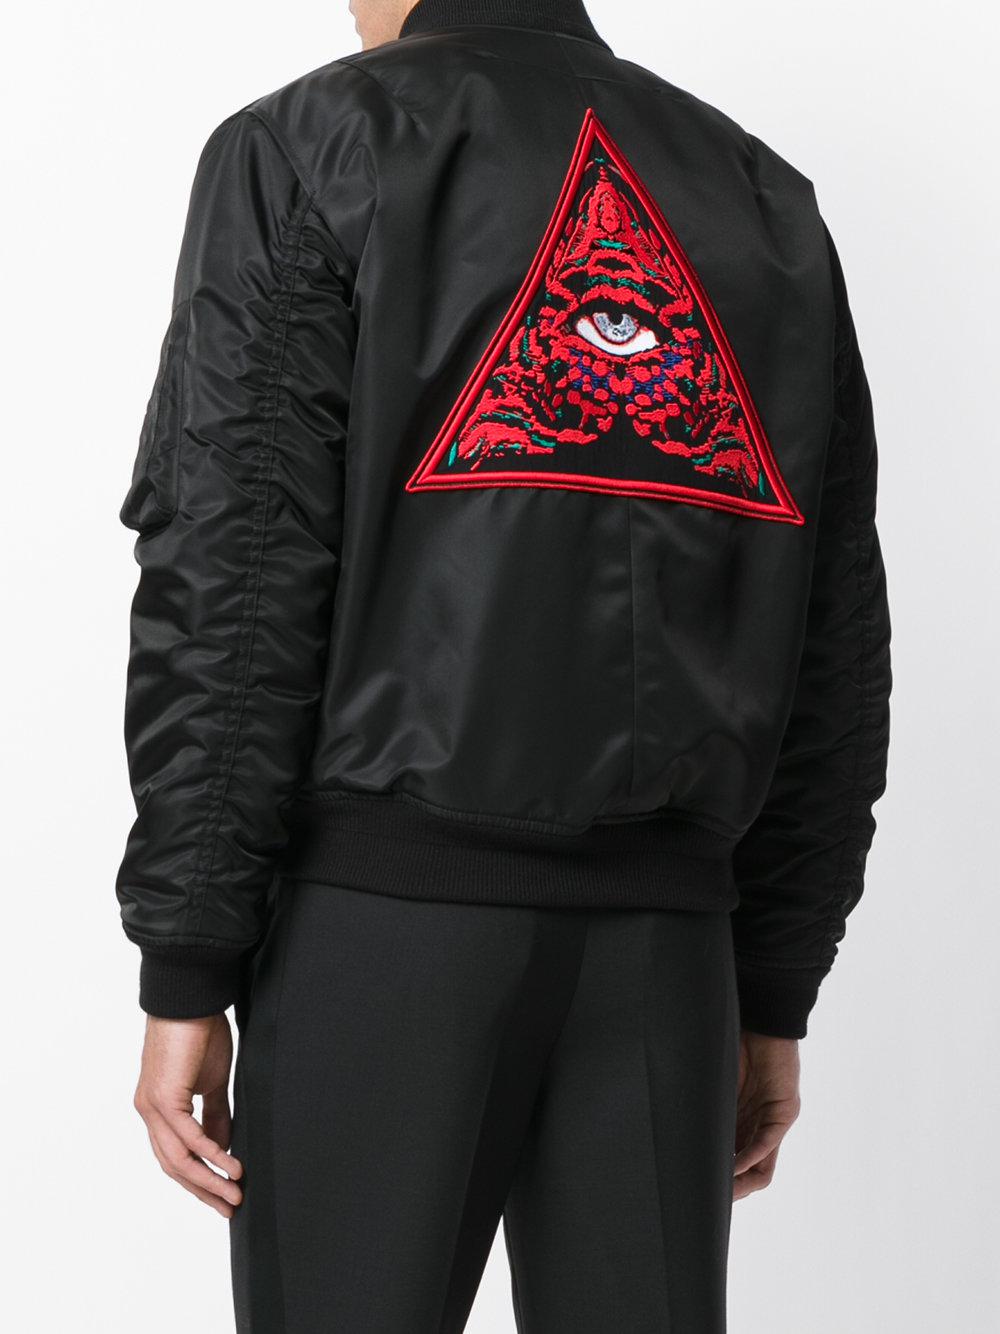 Lyst - Givenchy Illuminati Patch Bomber Jacket in Black for Men